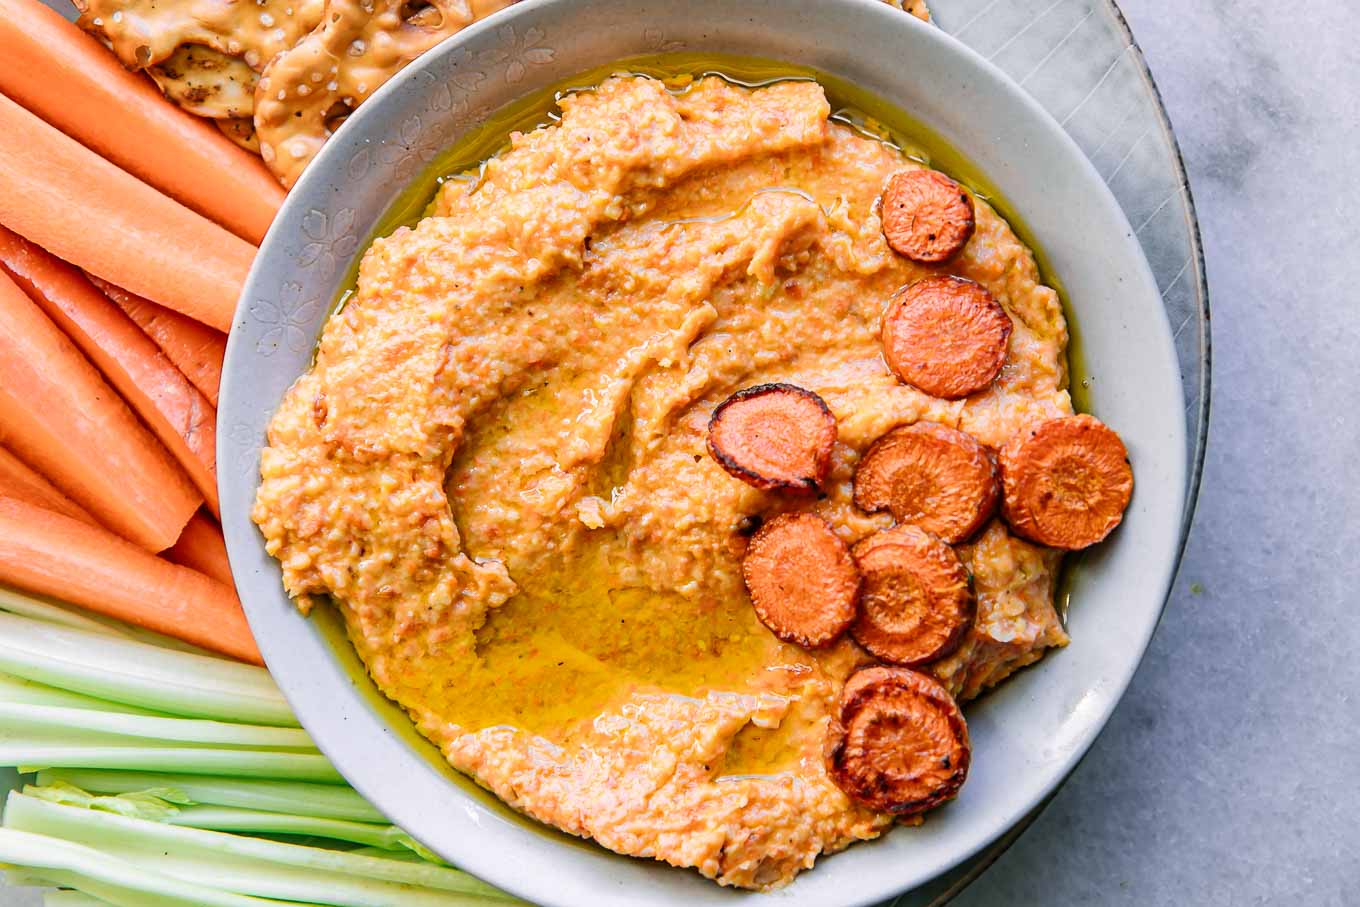 a bowl of carrot hummus dip on a plate with vegetables for dipping